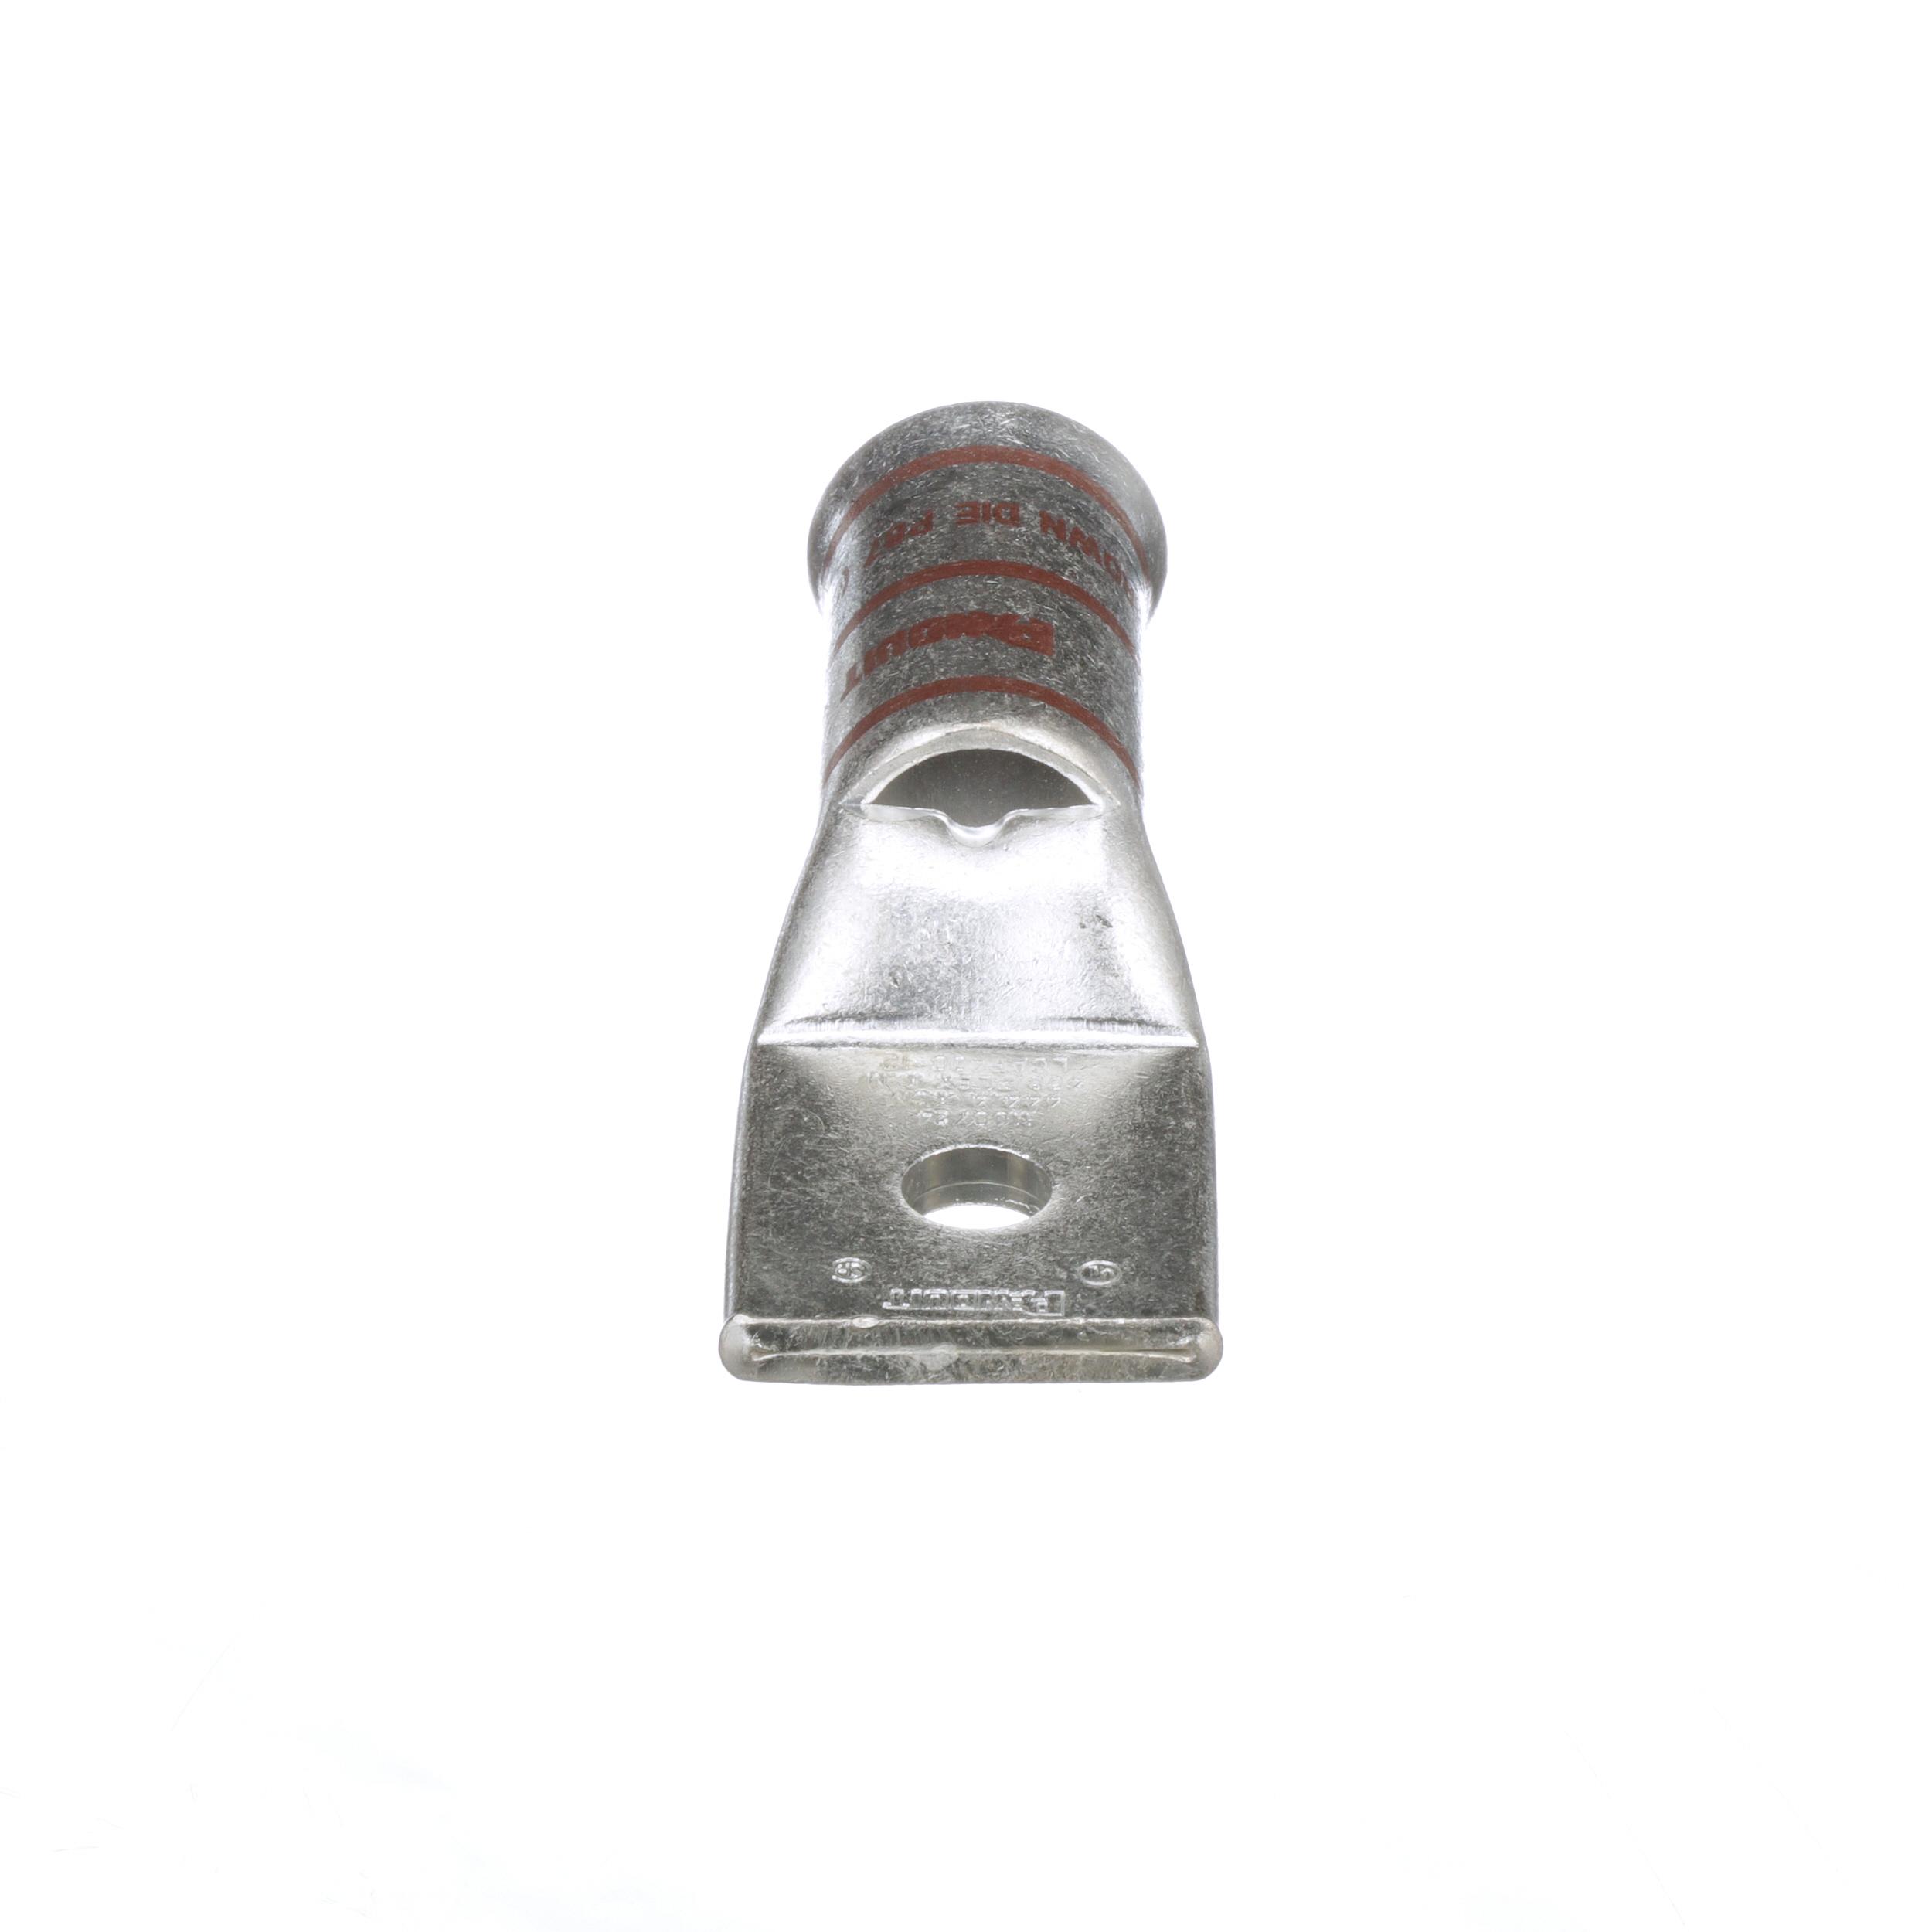 Panduit LCAF400-12-6 Pan-Lug Tin-Plated Copper Compression Connectors - Lugs